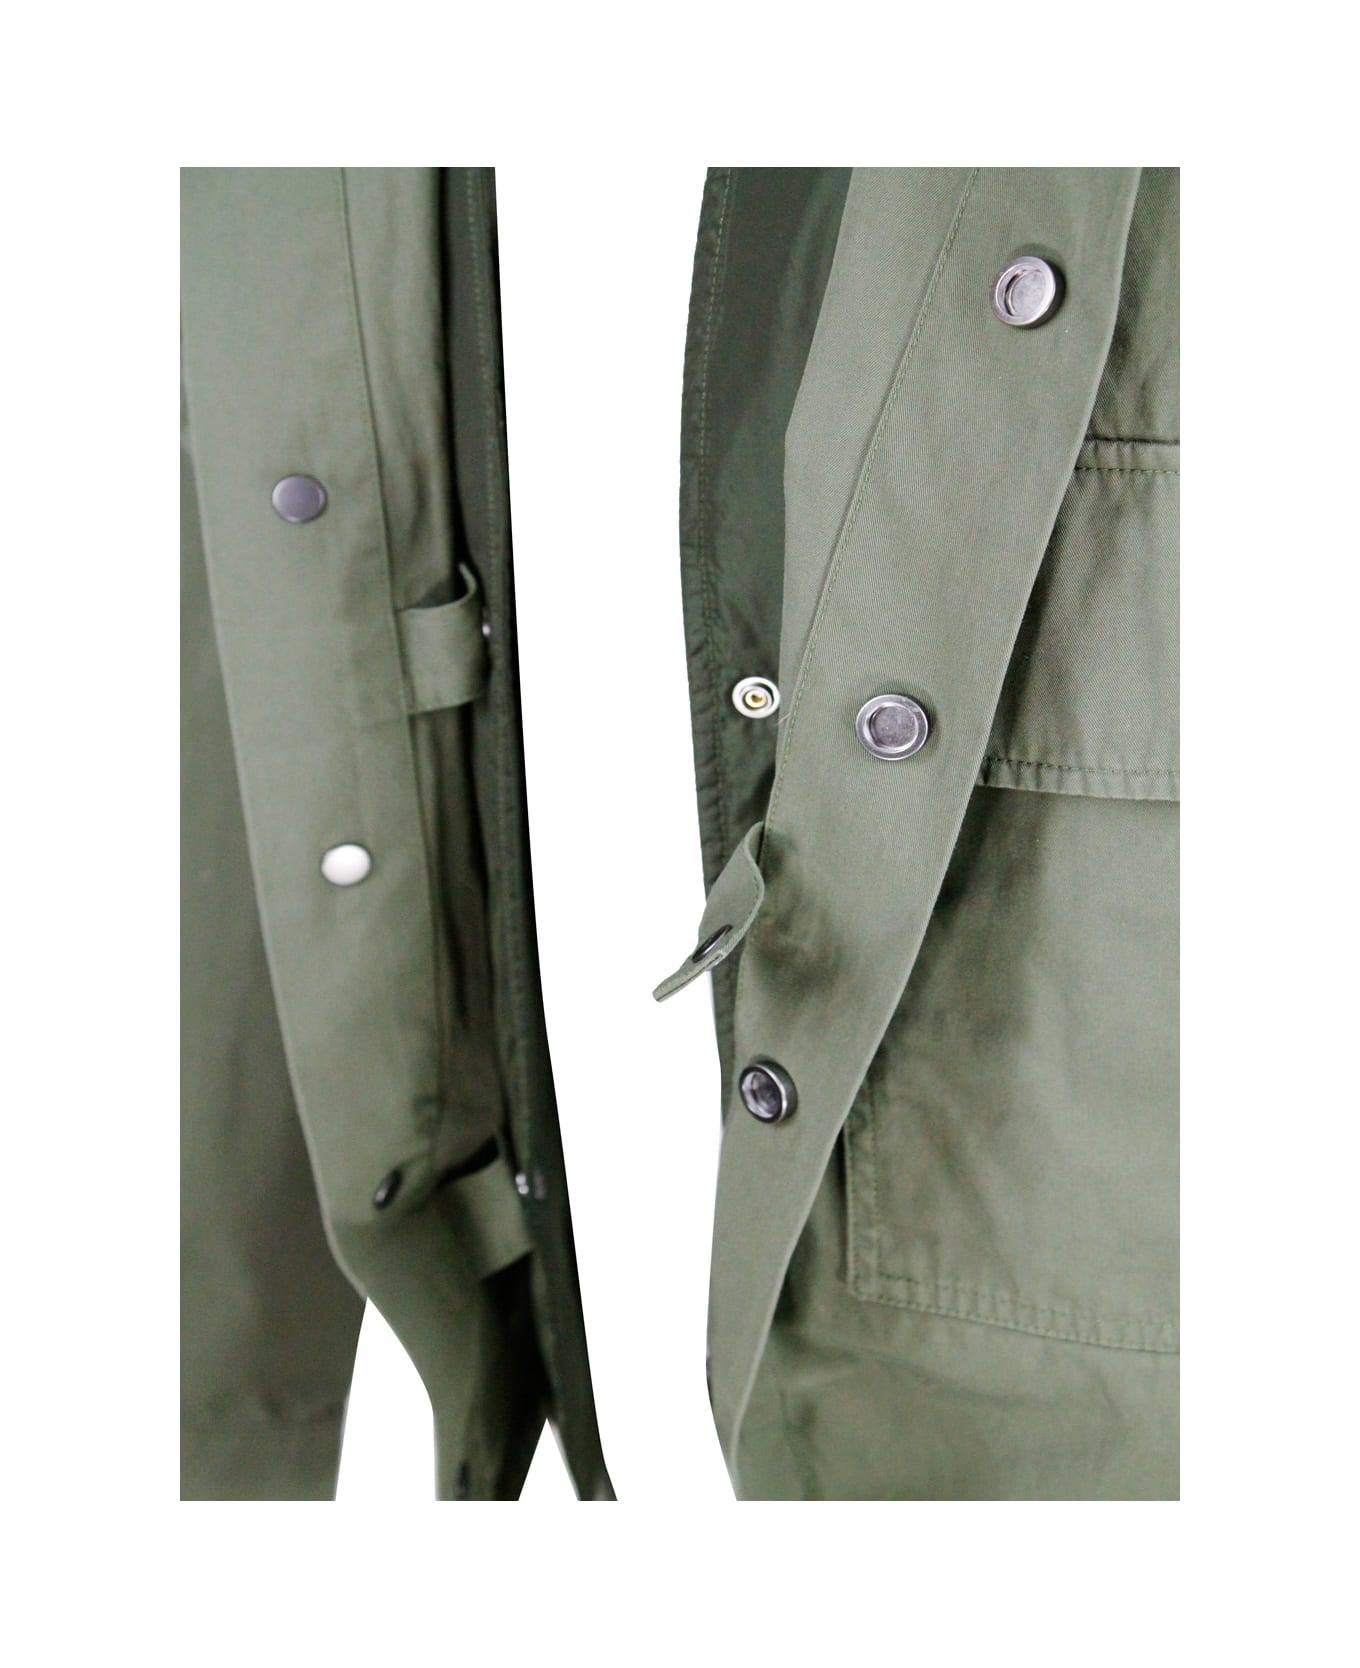 Add Recycled Nylon Shirt Jacket With Detachable Internal Padded Vest. - Green